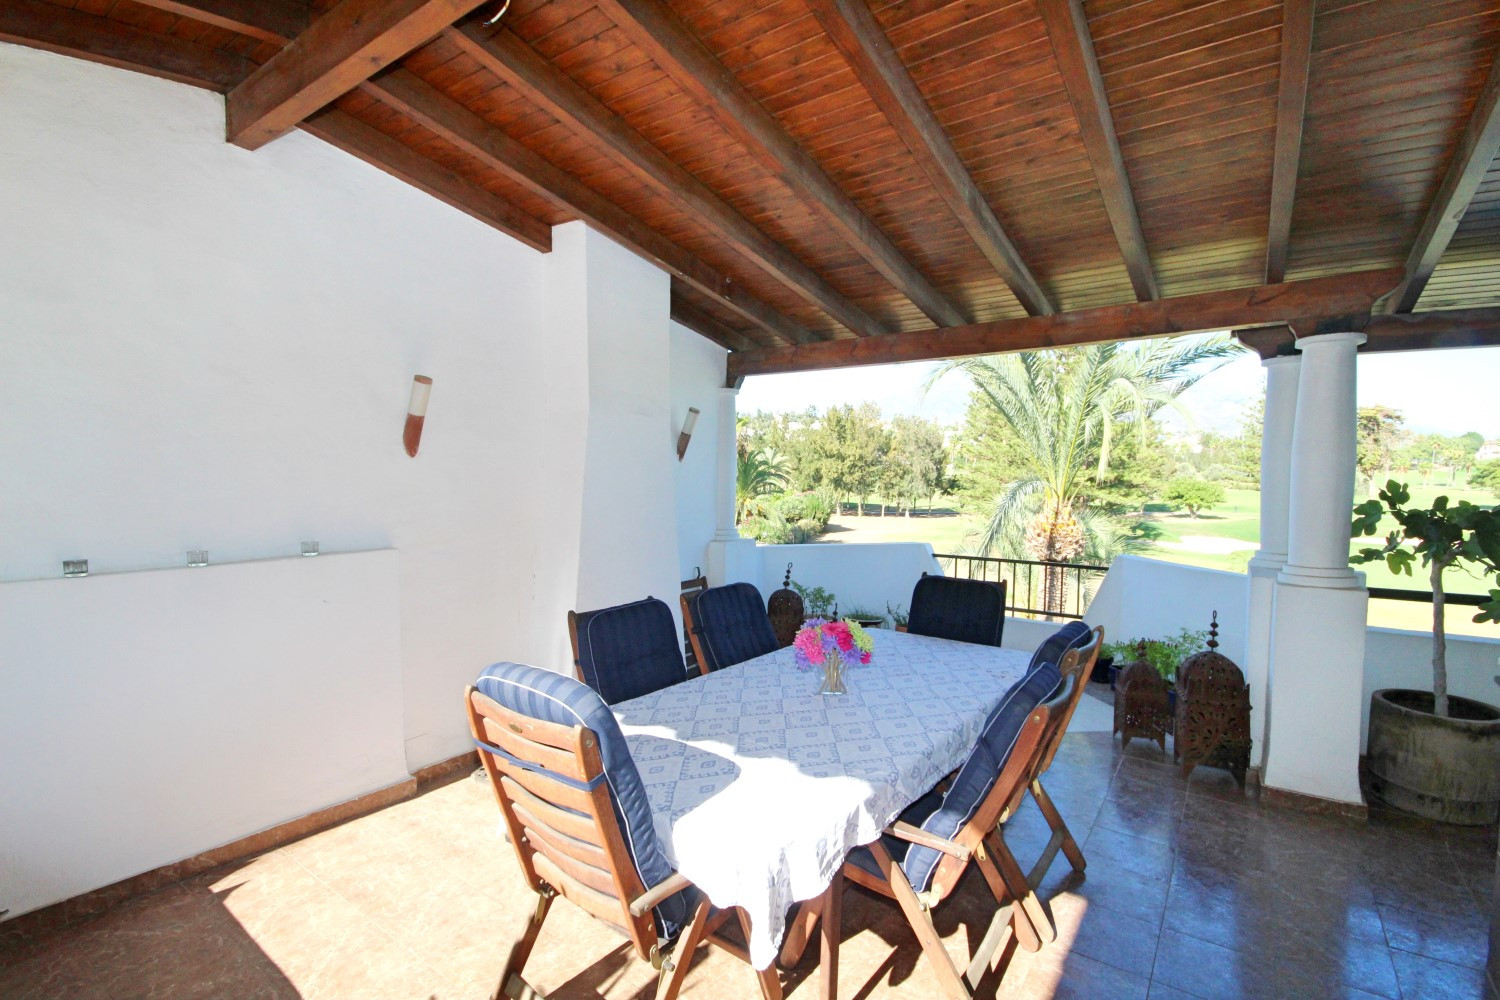 Townhouse for sale in Marbella - Nueva Andalucía 8